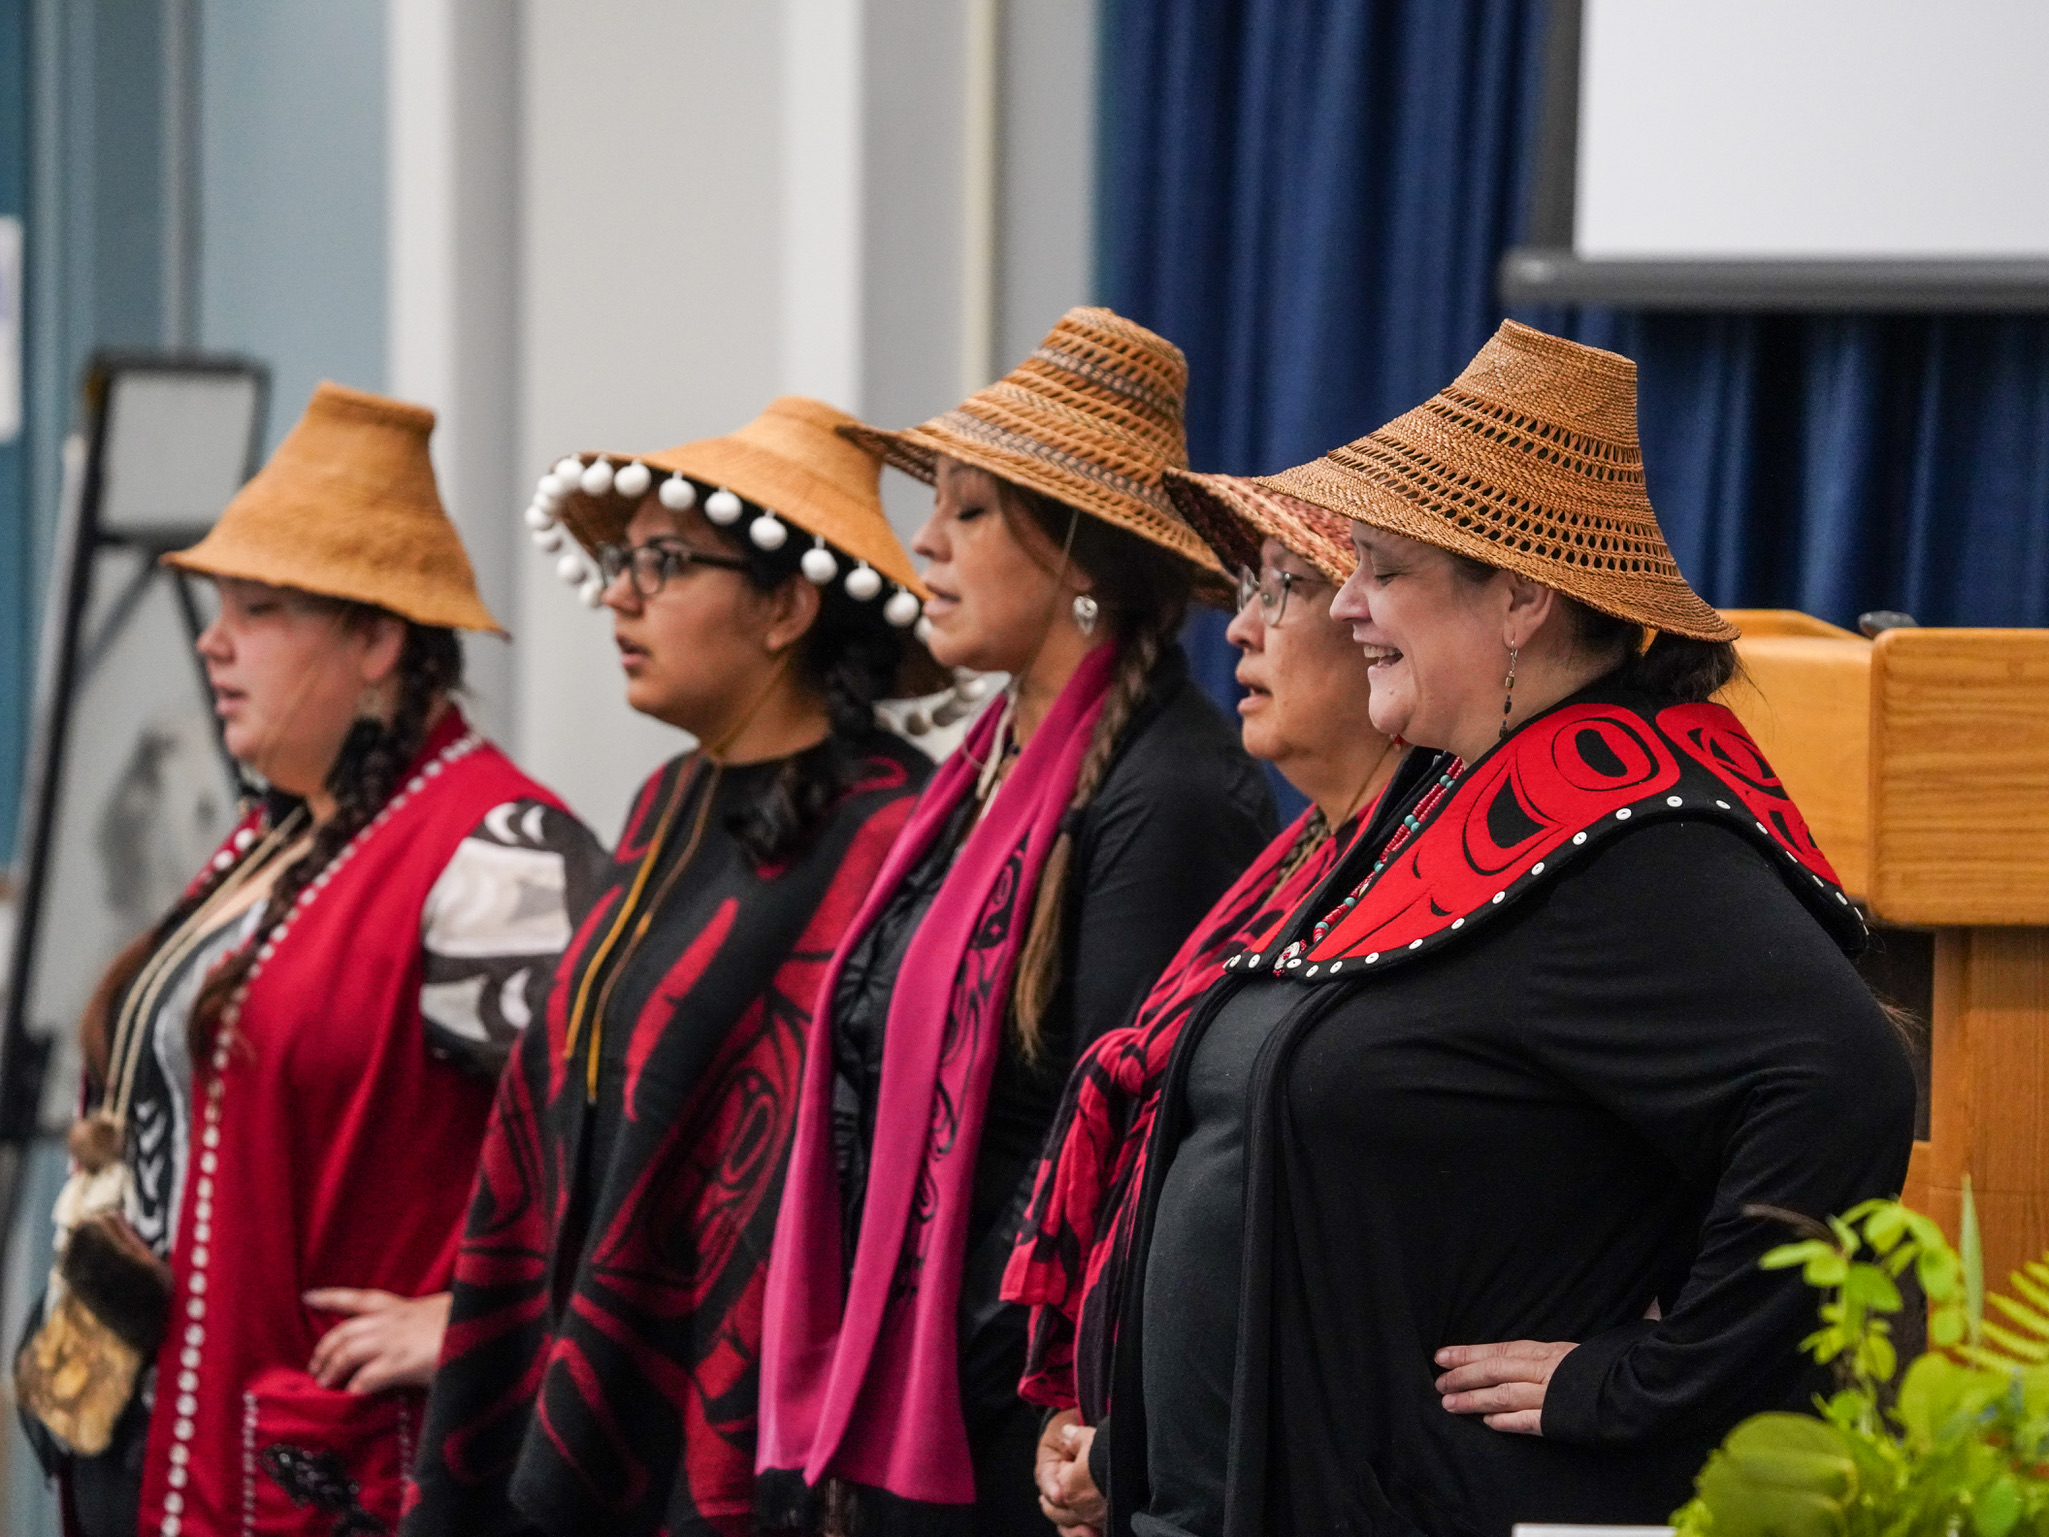 Five members of the Haida Descendants Dancers from the Saxman Clan dressed in red and black traditional native garments sing as a part of the land acknowledgement ritual.